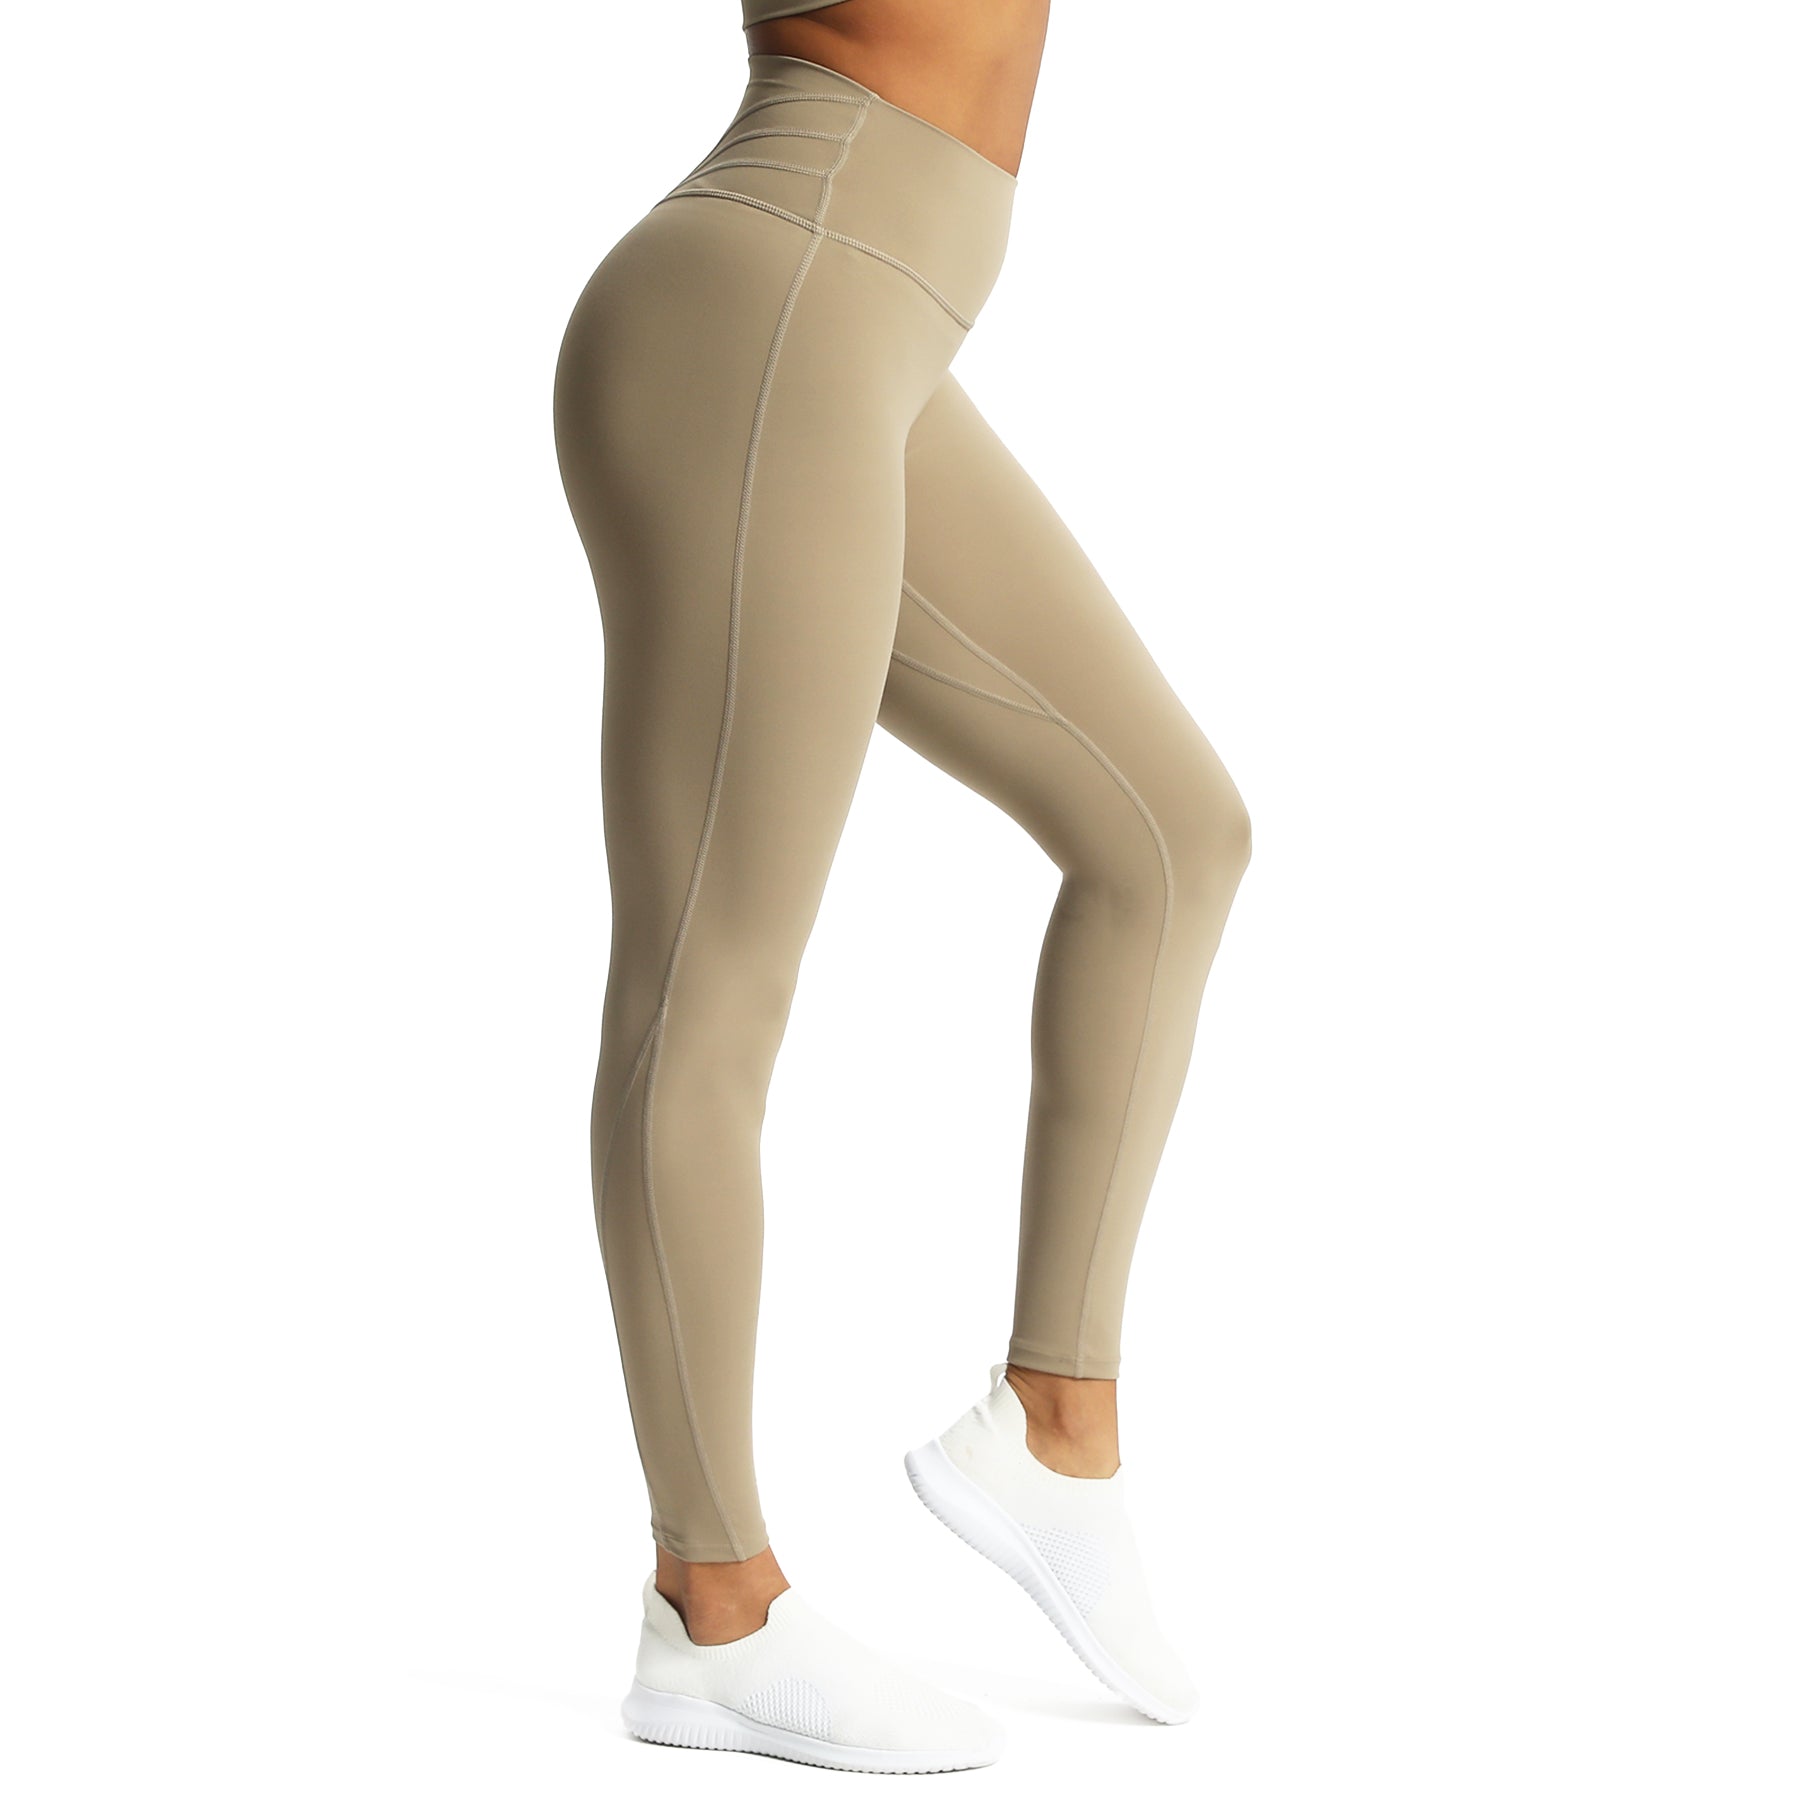 Aoxjox High Waisted Workout Leggings for Women Ghana